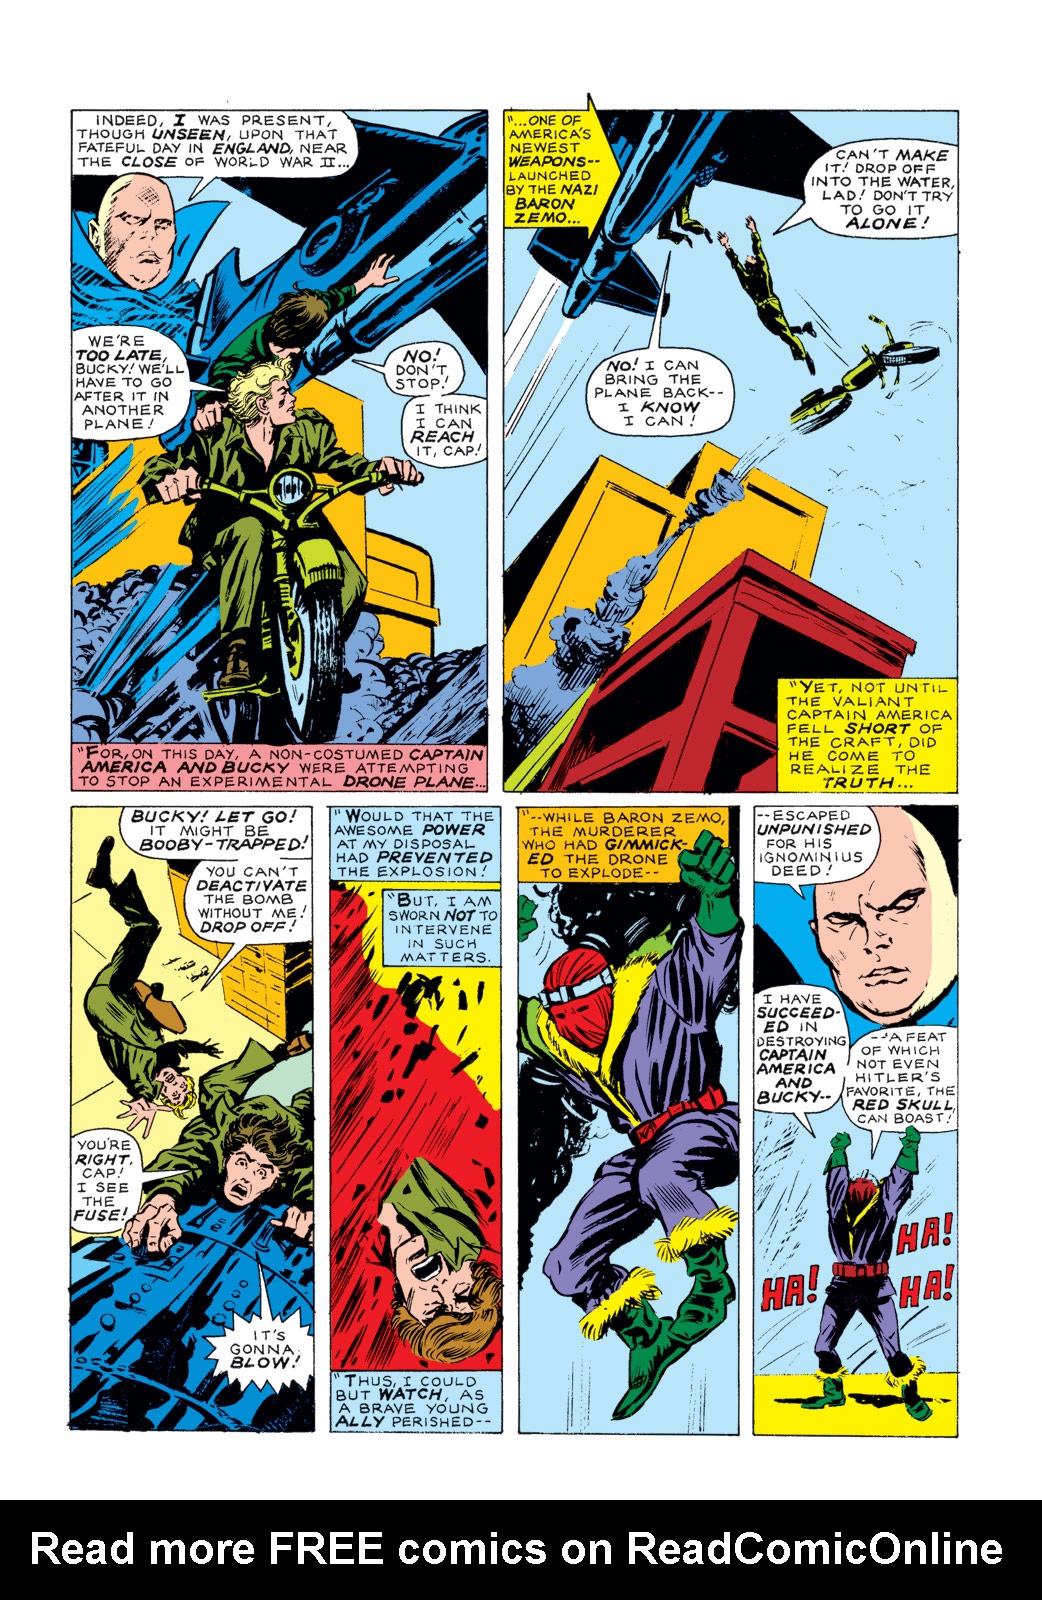 What If? (1977) issue 5 - Captain America hadn't vanished during World War Two - Page 3